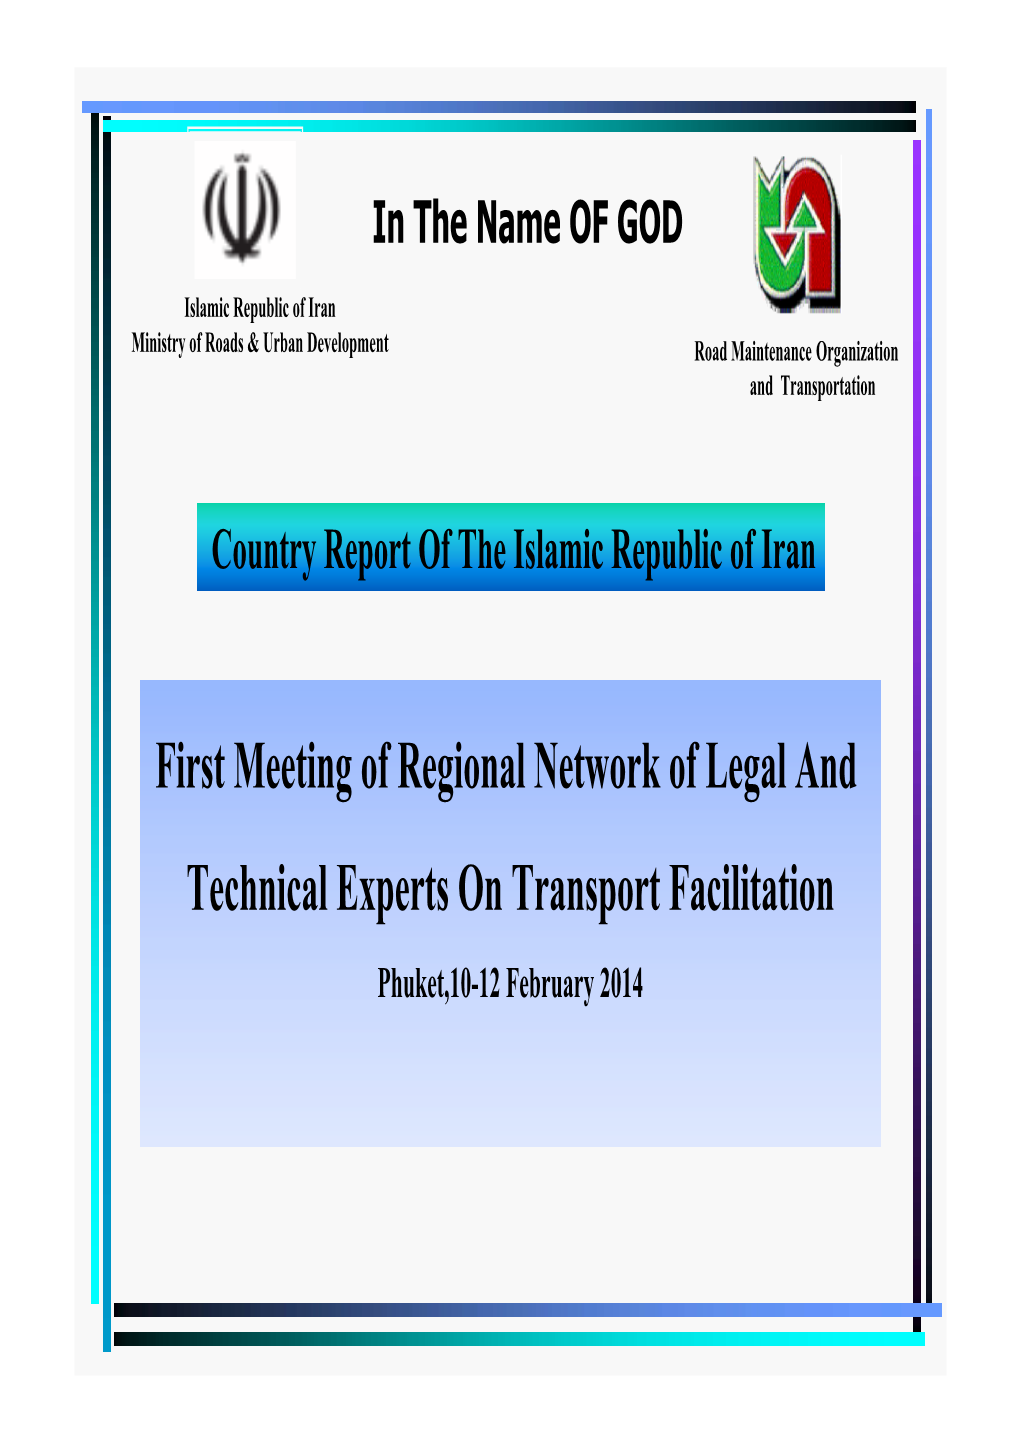 First Meeting of Regional Network of Legal and Technical Experts On